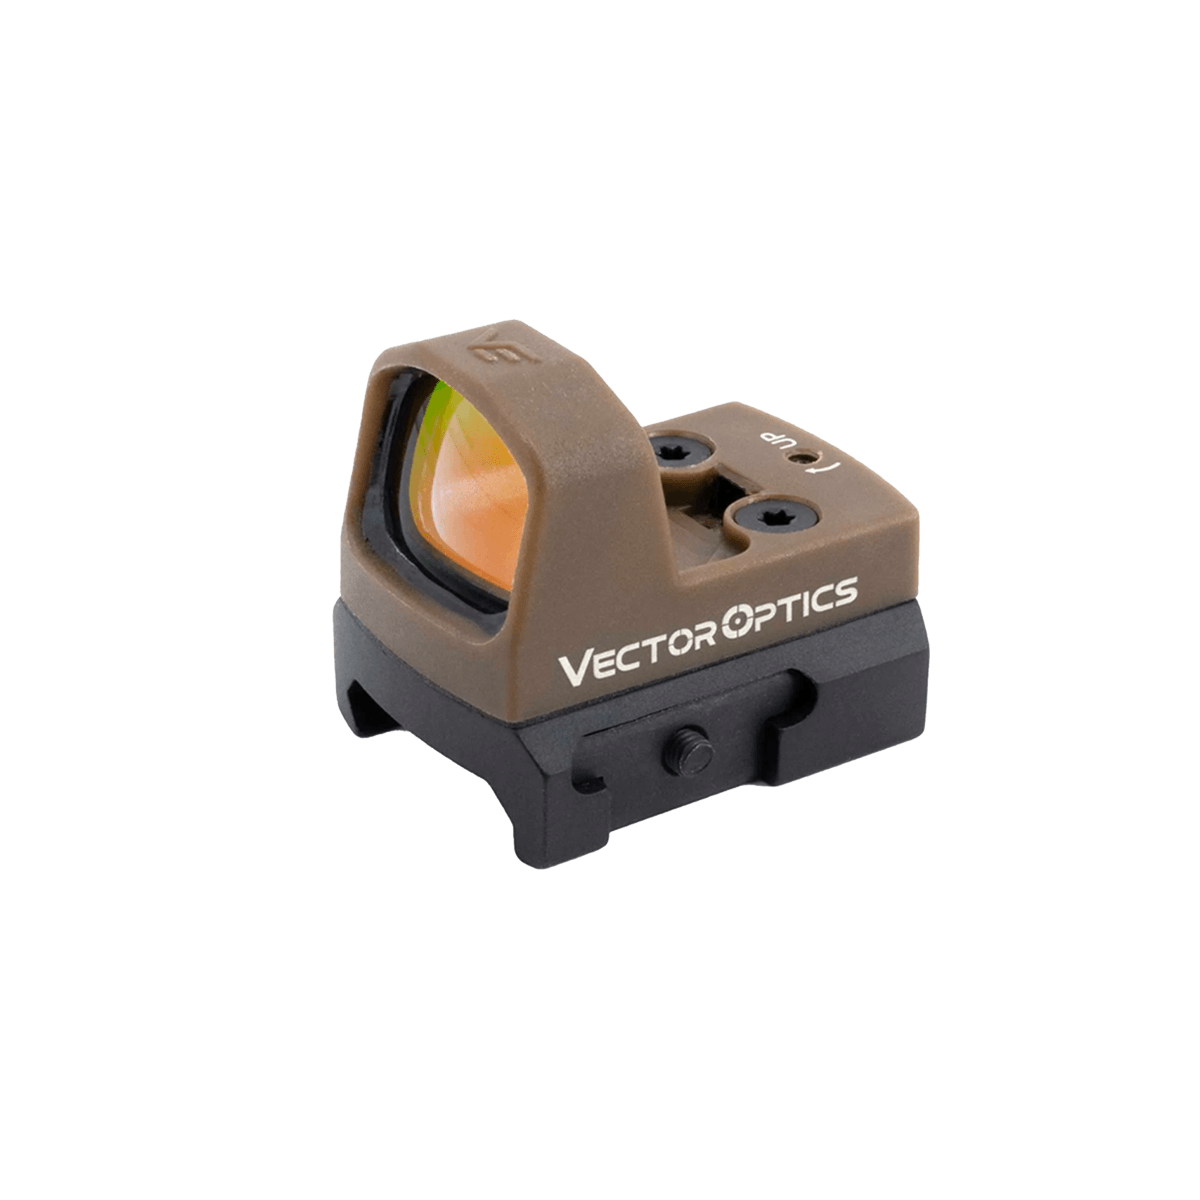 Frenzy-S 1x16x22 Engineering Polymer AUT Red Dot Sight FDE